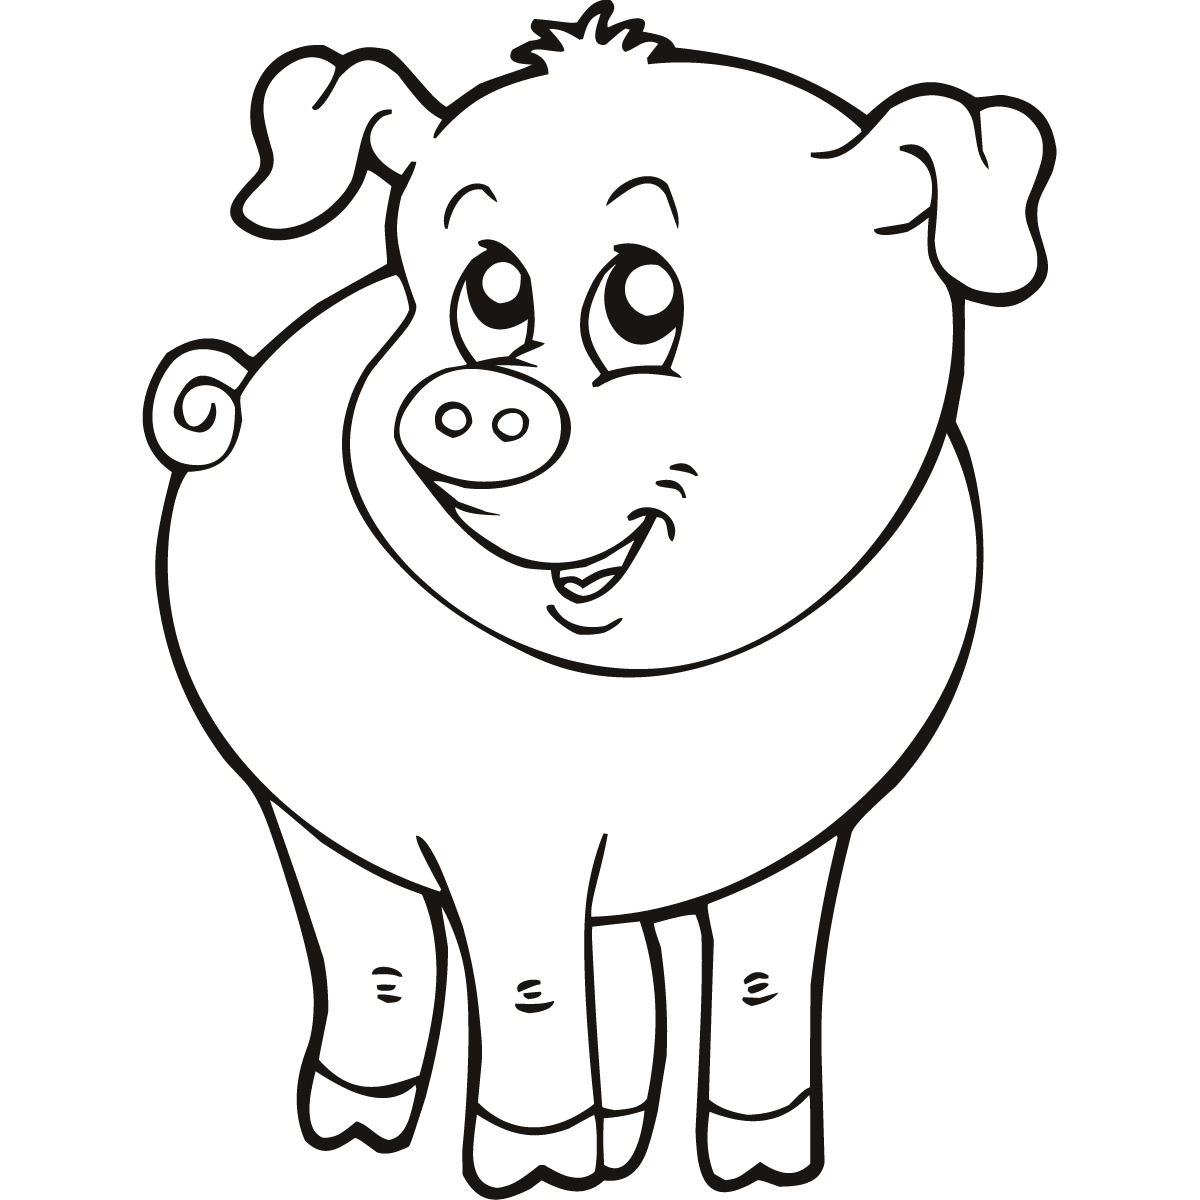 Draw me farm animals | Drawing and colouring Petit-Fernand - Petit Fernand  UK